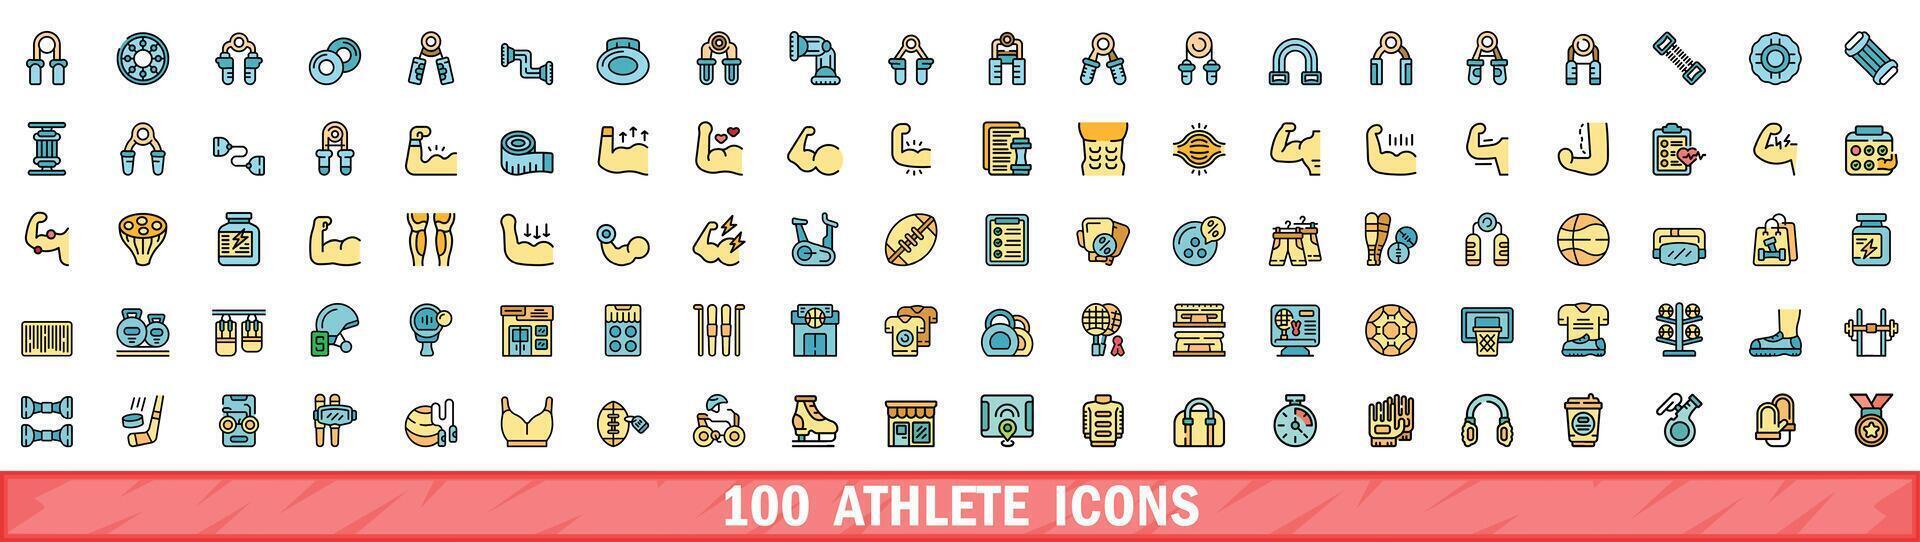 100 athlete icons set, color line style vector